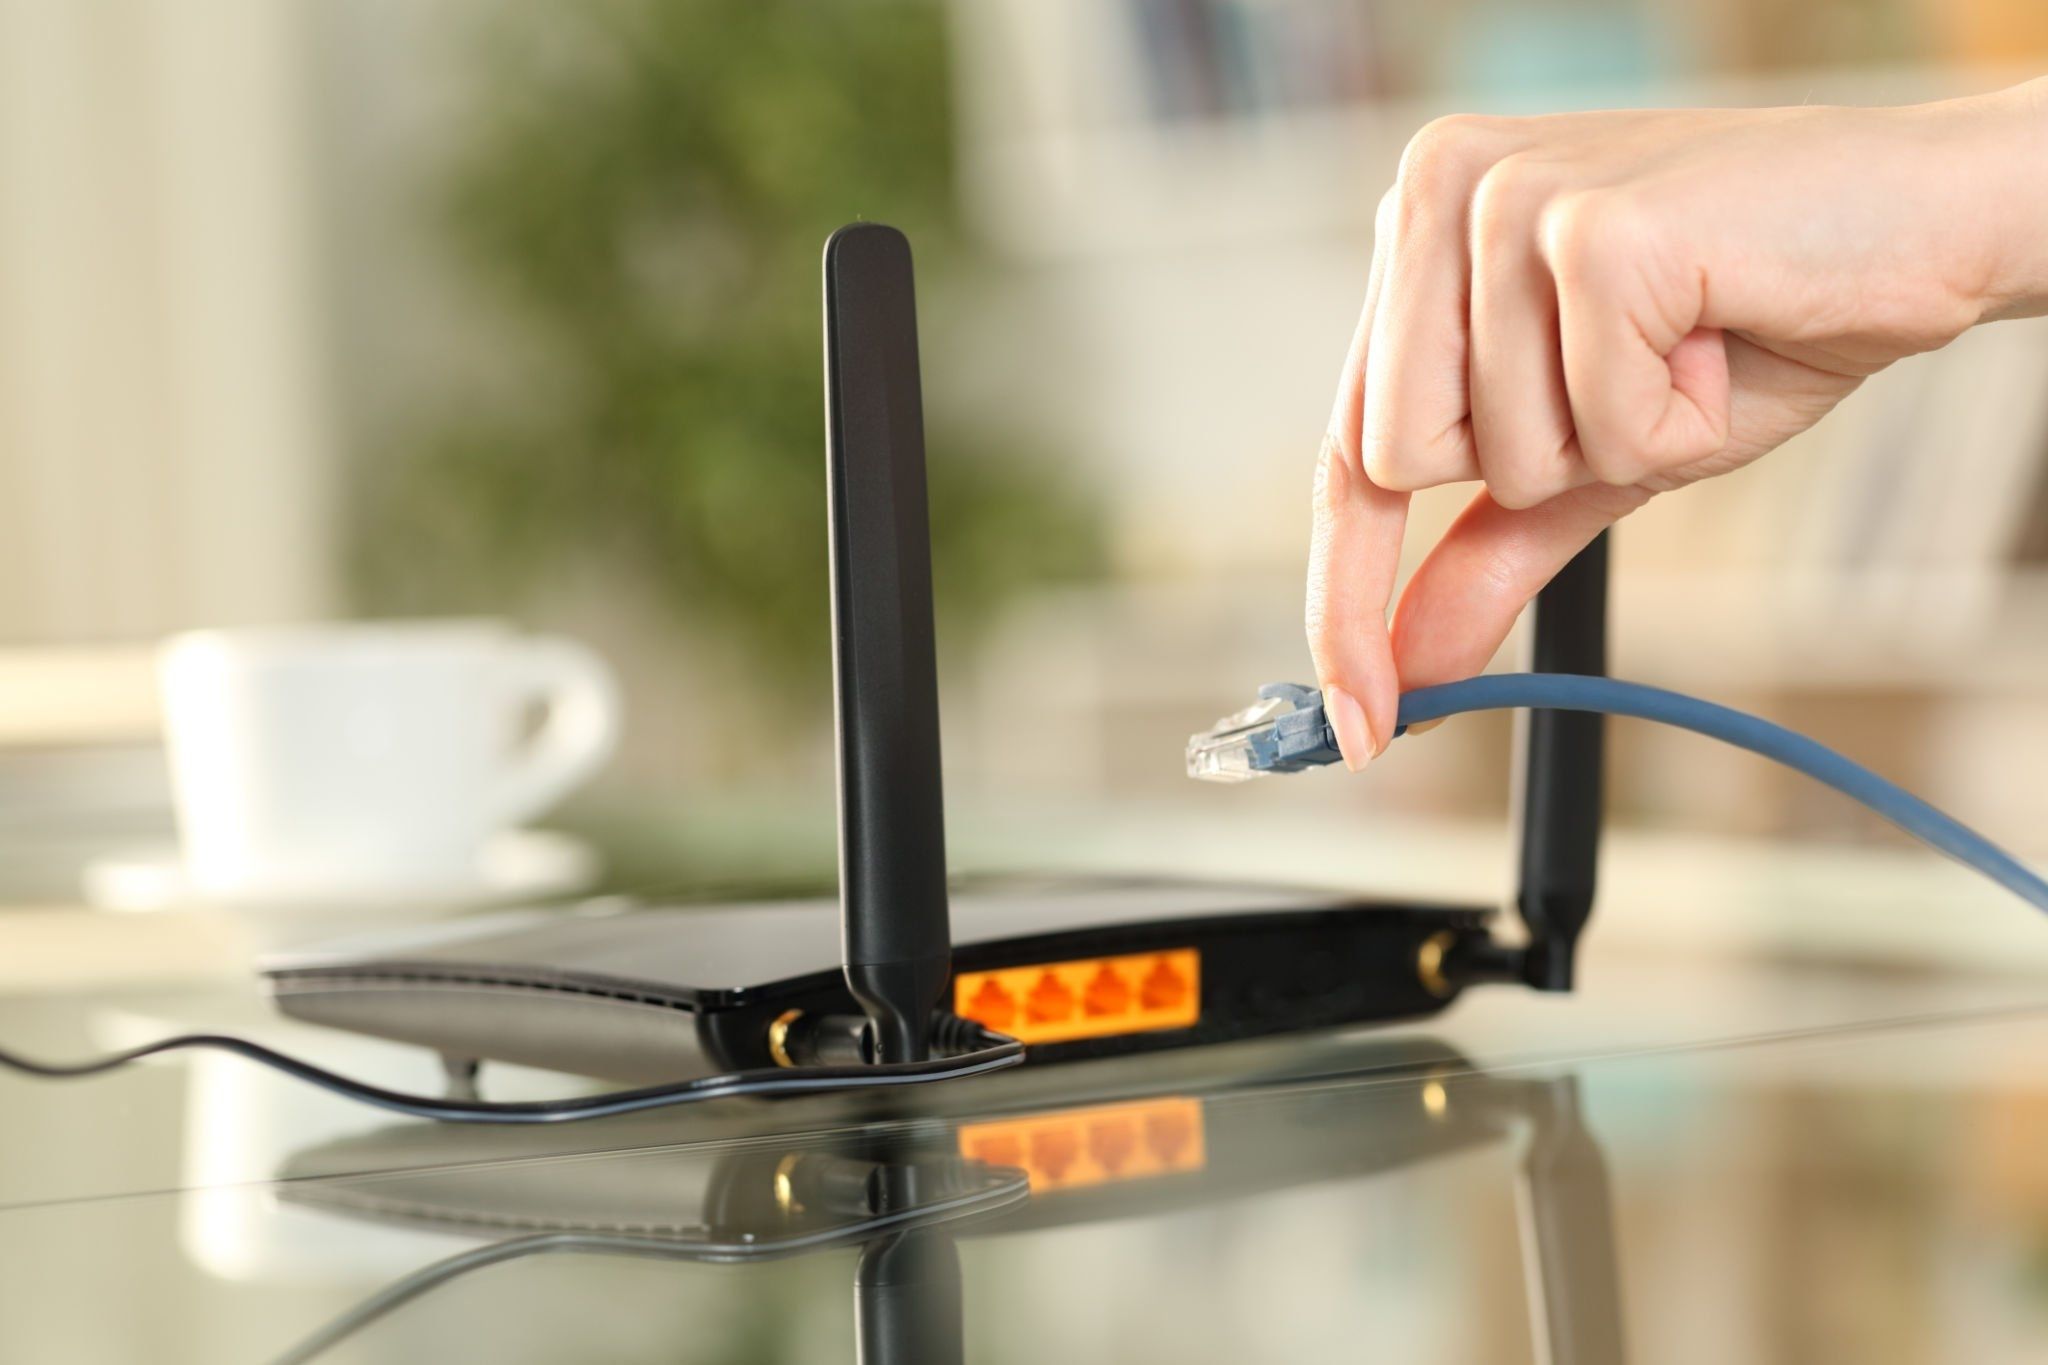 How Frequently Should You Reset Your Spectrum Wi-Fi Router?